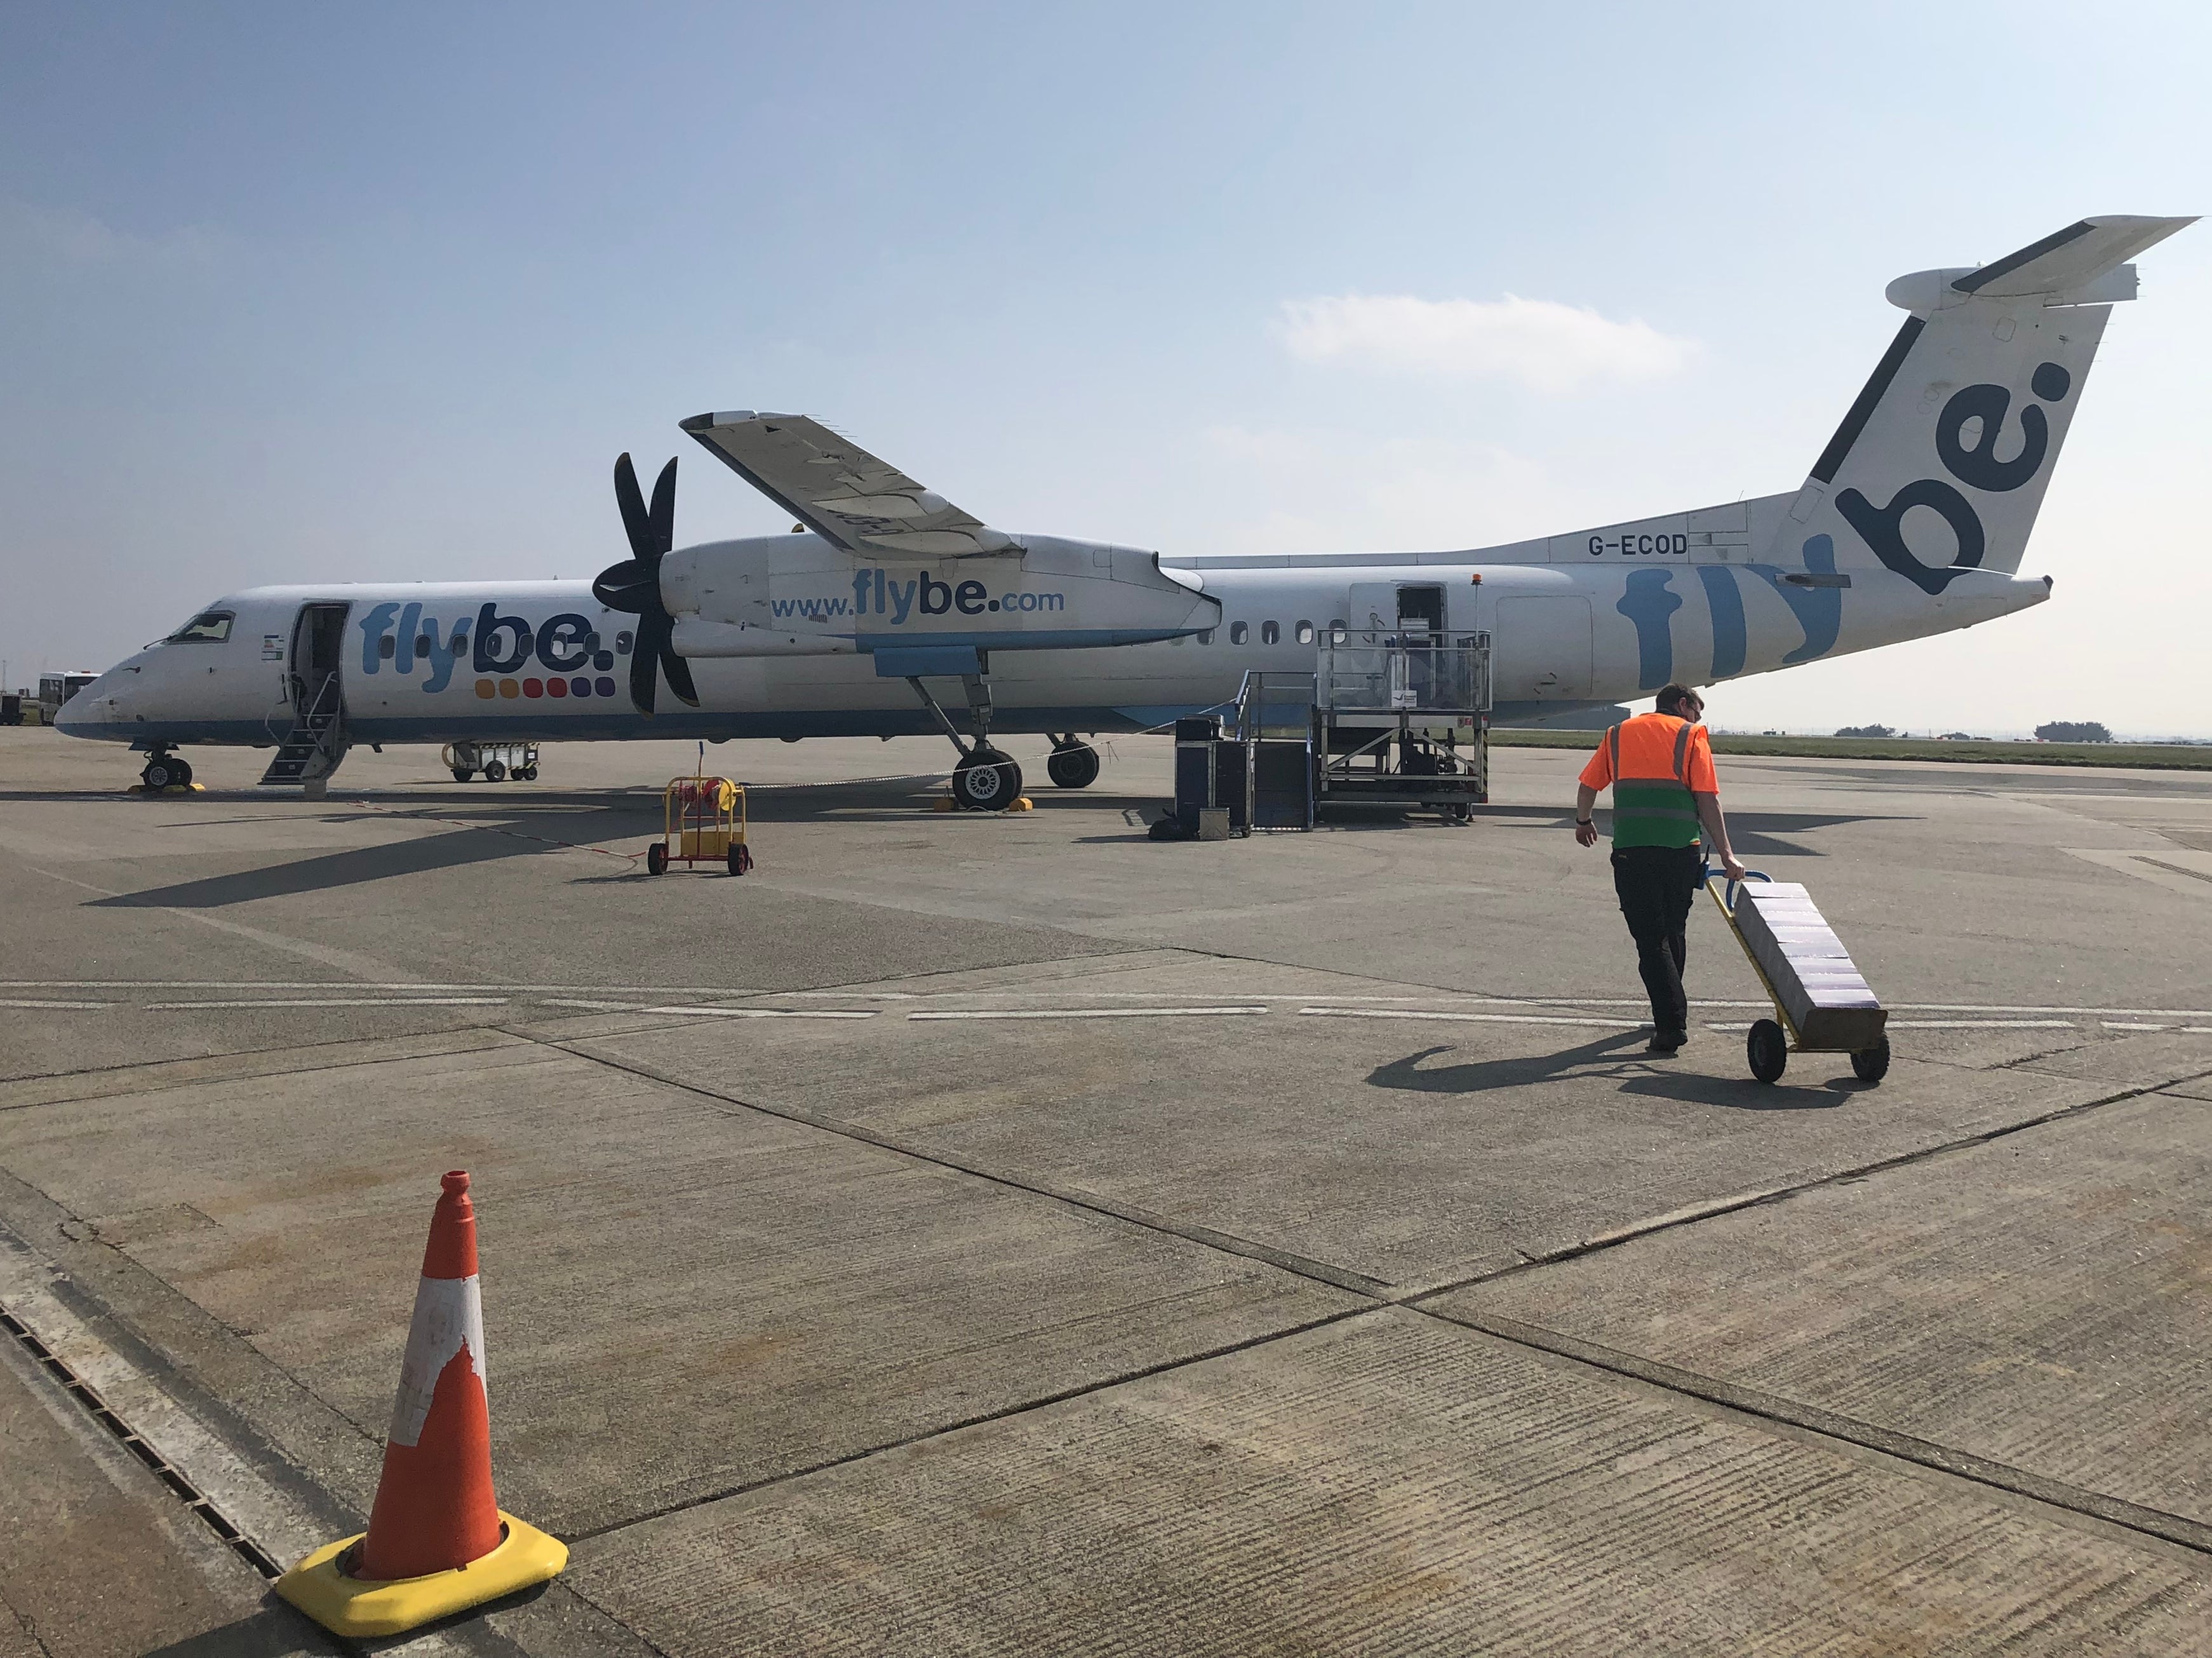 Going nowhere: Flybe has collapsed, and Cornwall’s airport at Newquay has closed